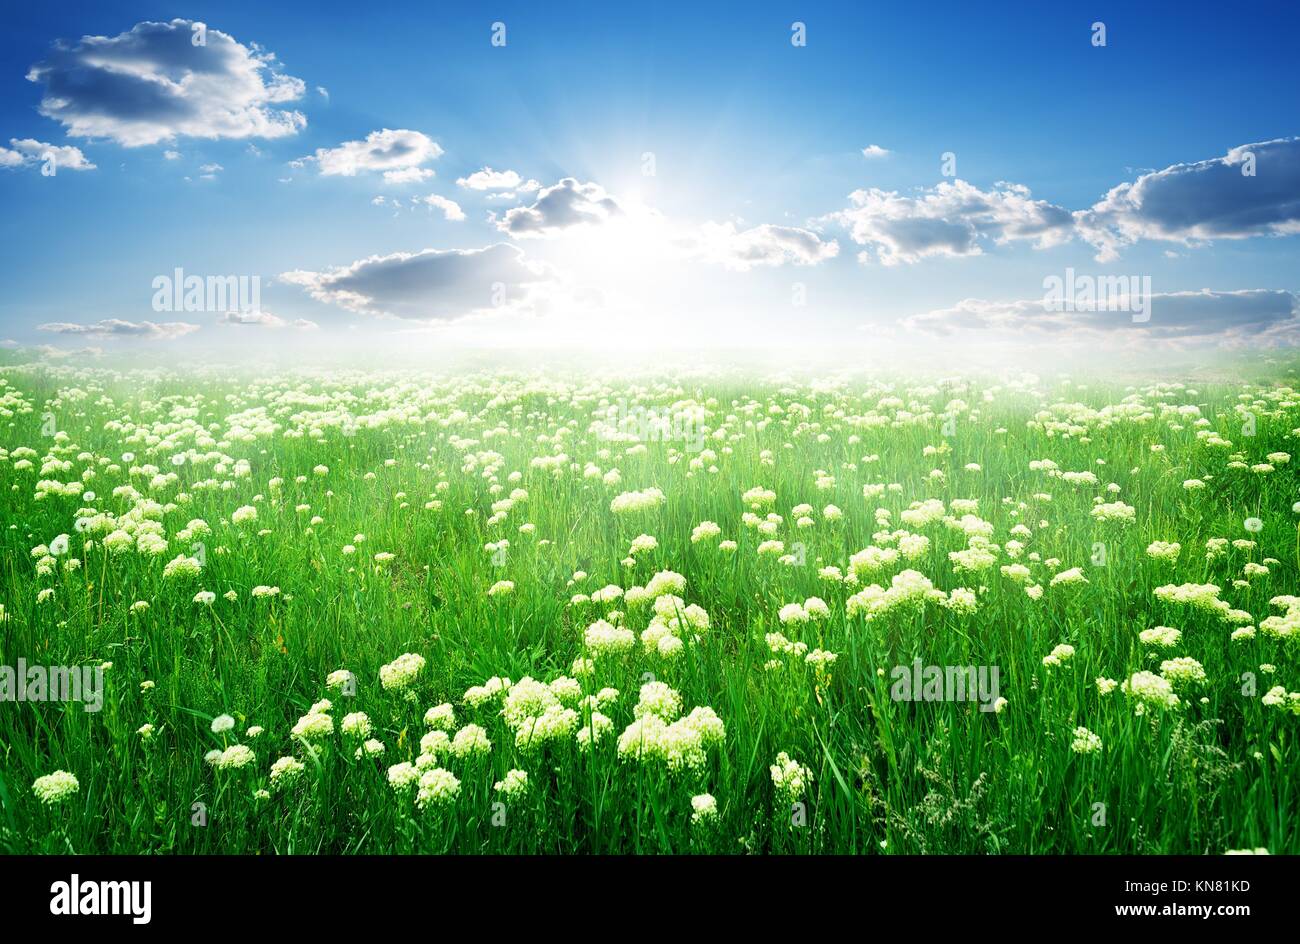 Field of white flowers and green grass in spring. Stock Photo